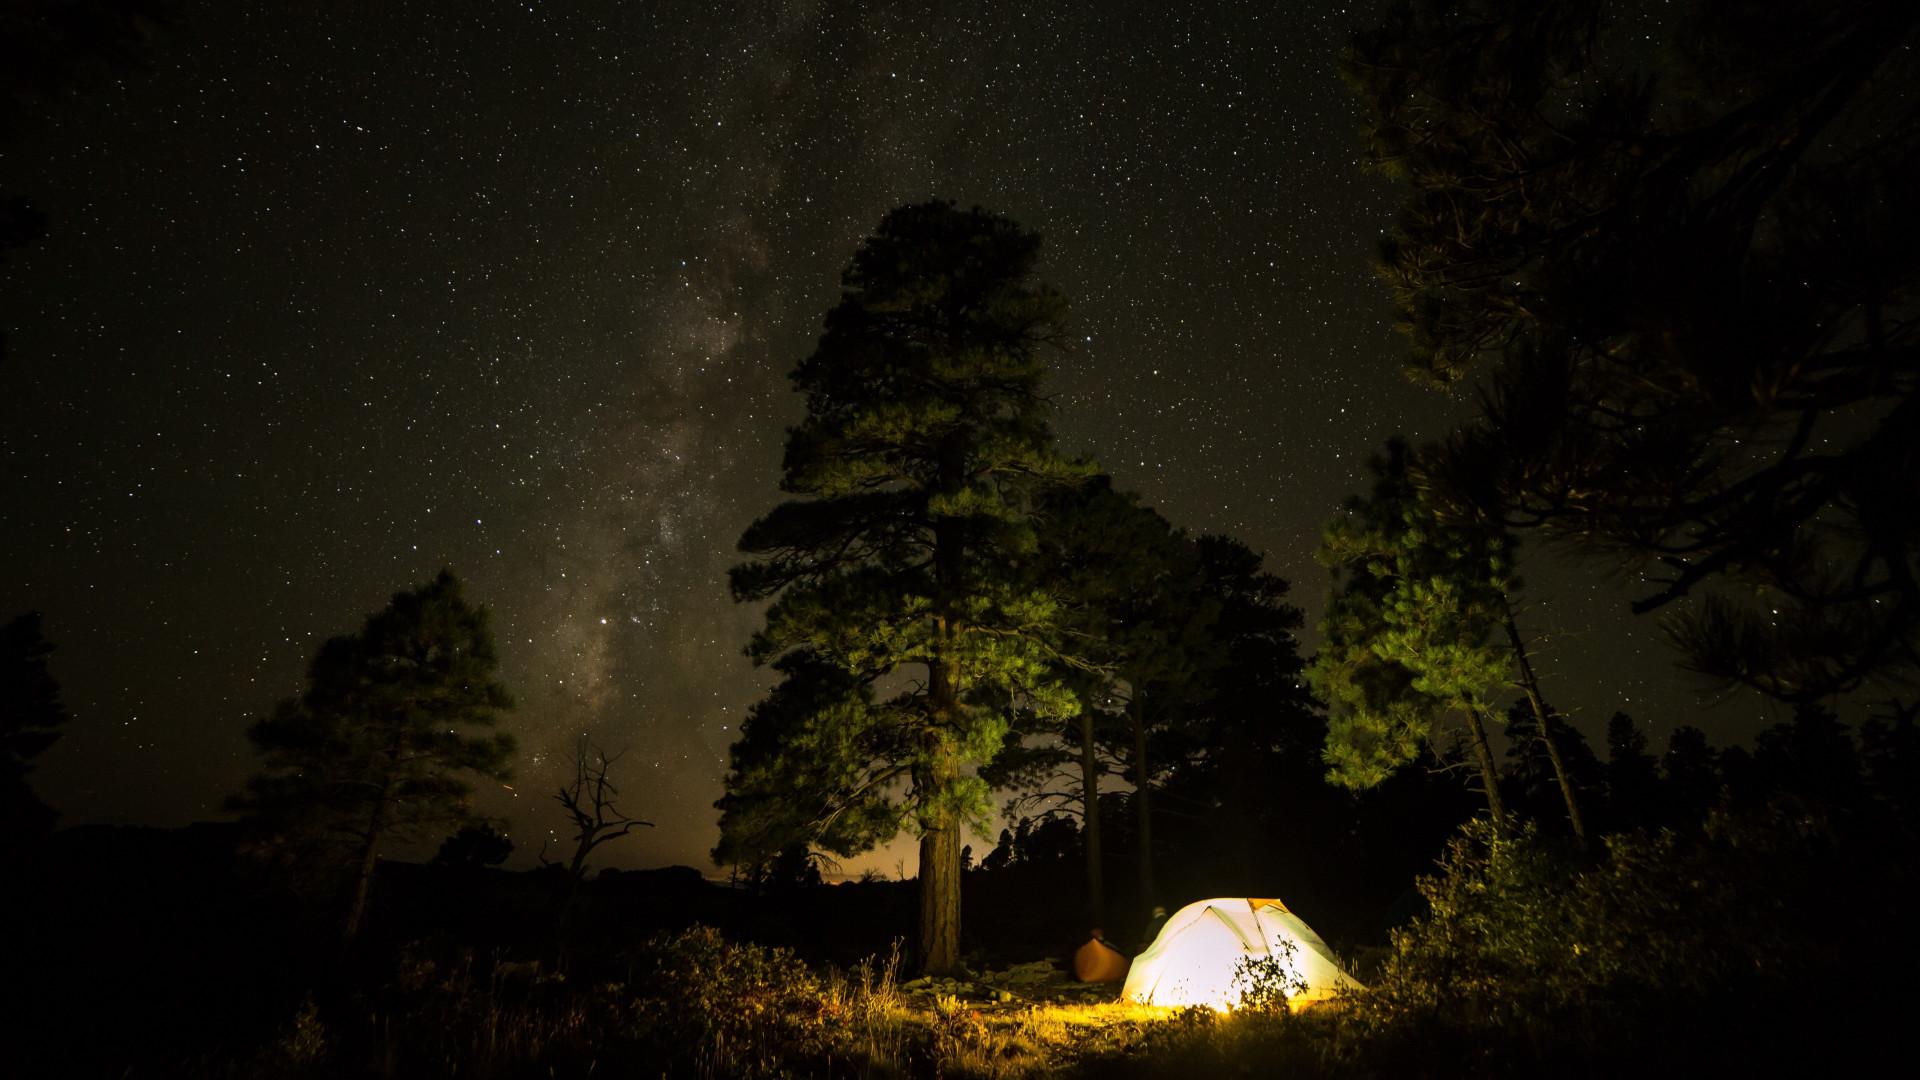 Download wallpaper: With tent under the night sky 1920x1080